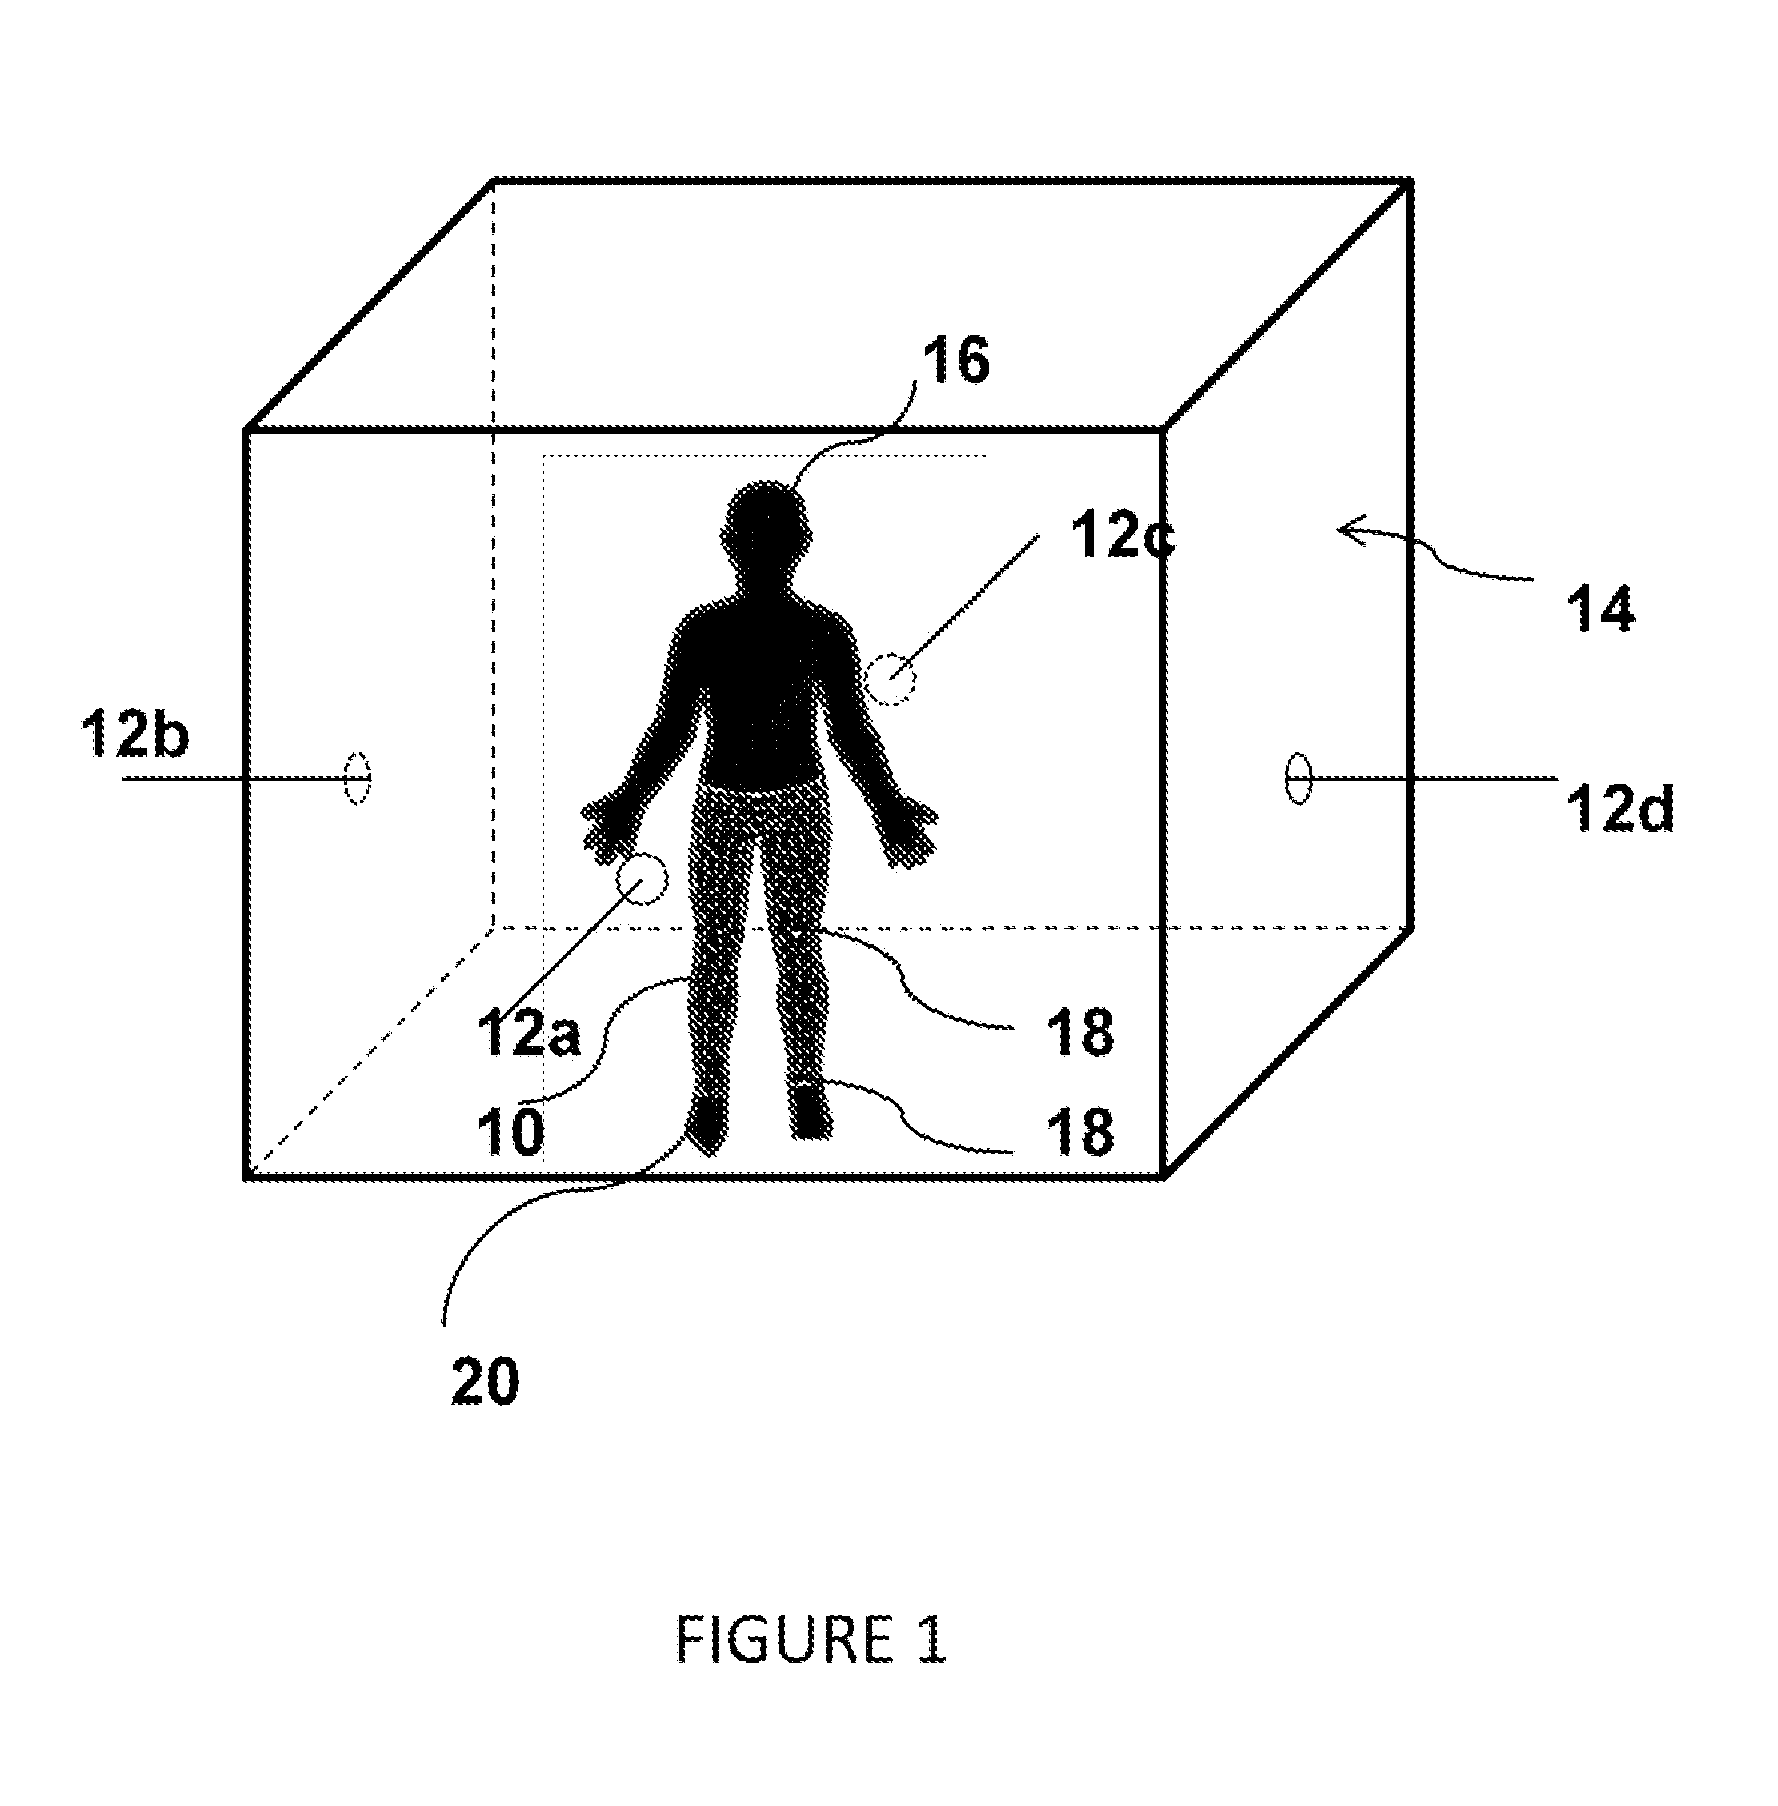 Method and apparatus to create 3-dimensional computer models of persons from specially created 2-dimensional images